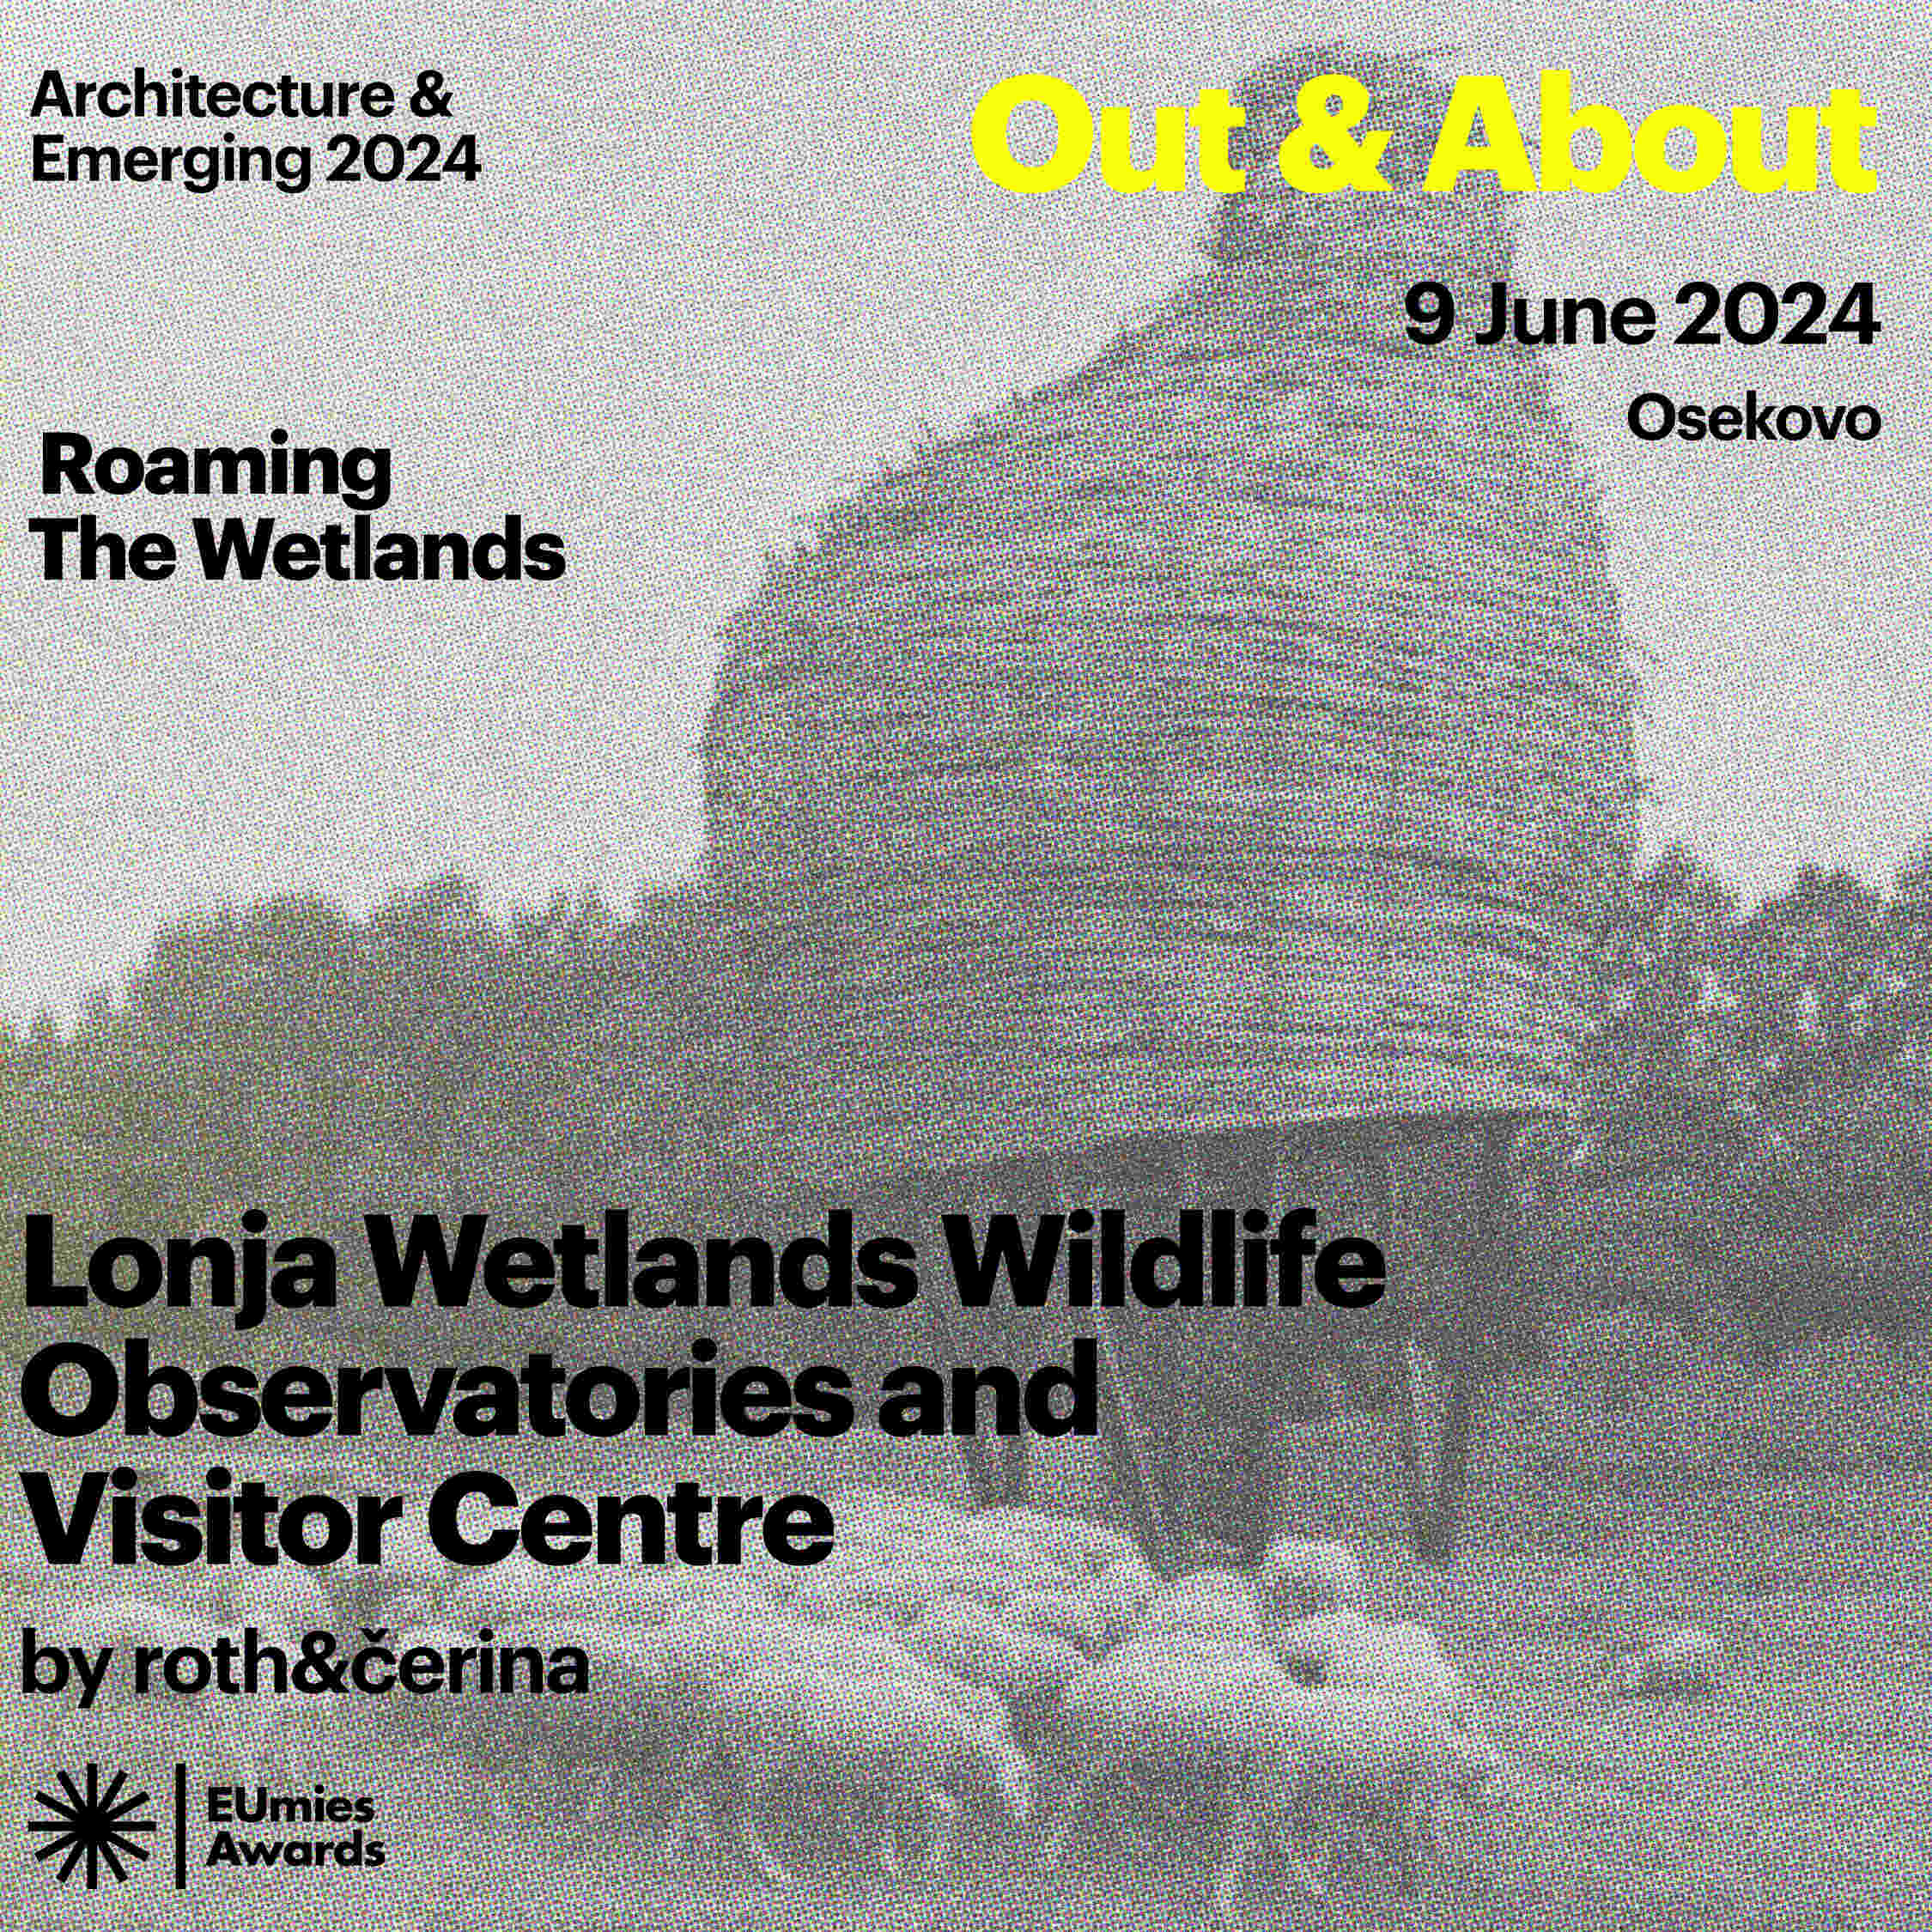 Out & About: Lonja Wetlands Wildlife Observatories and Visitor Centre